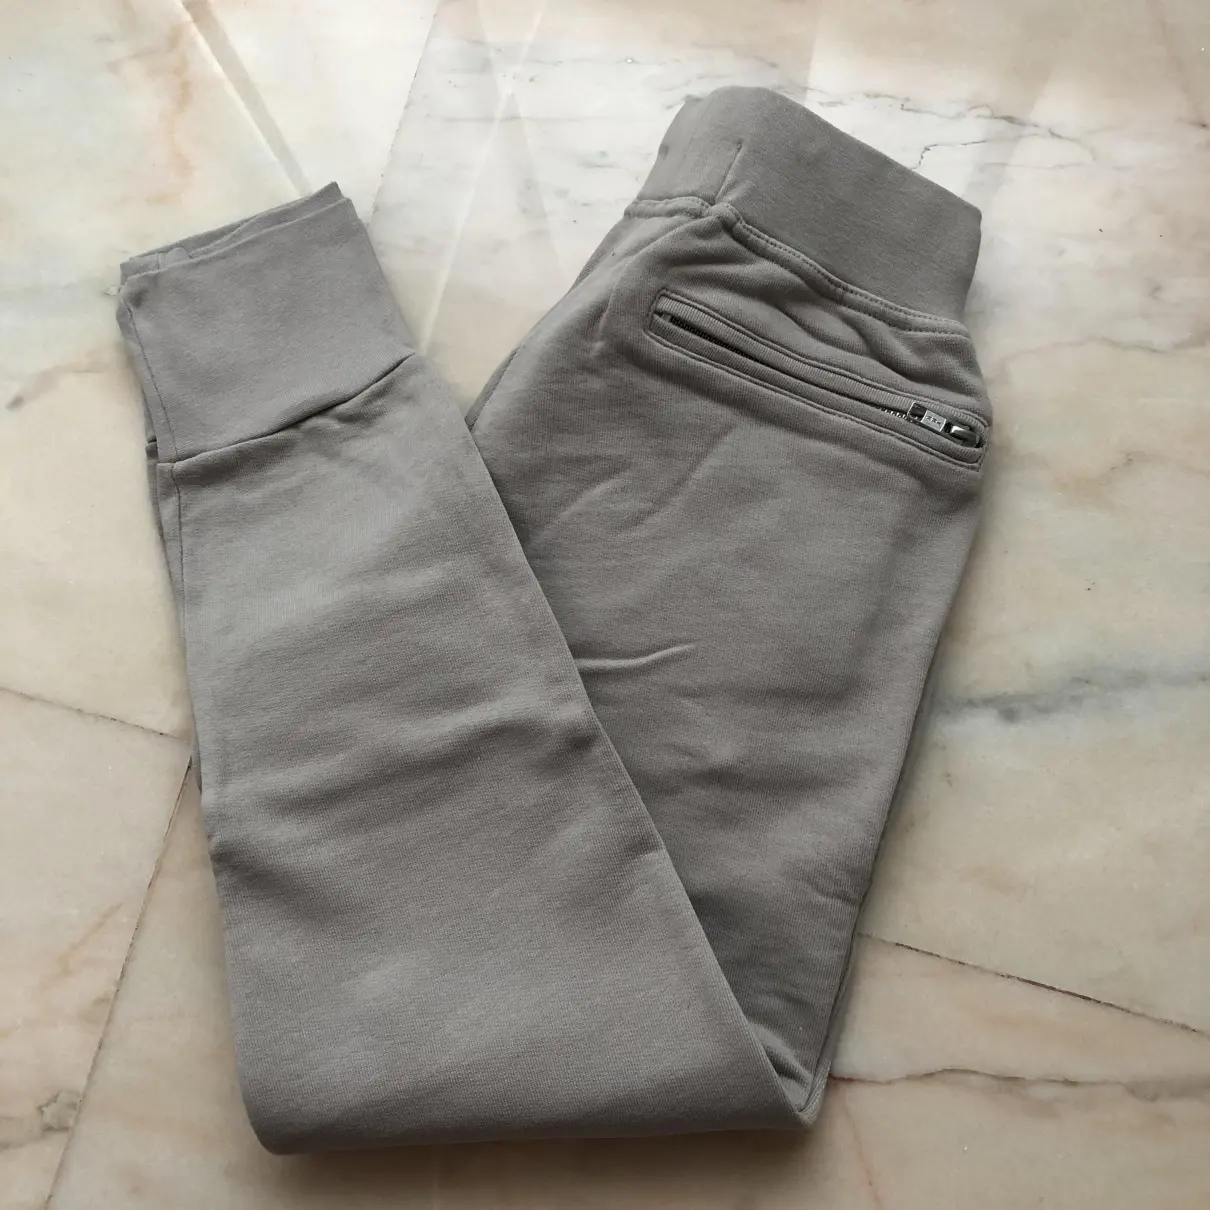 Buy Sincerely Jules Trousers online